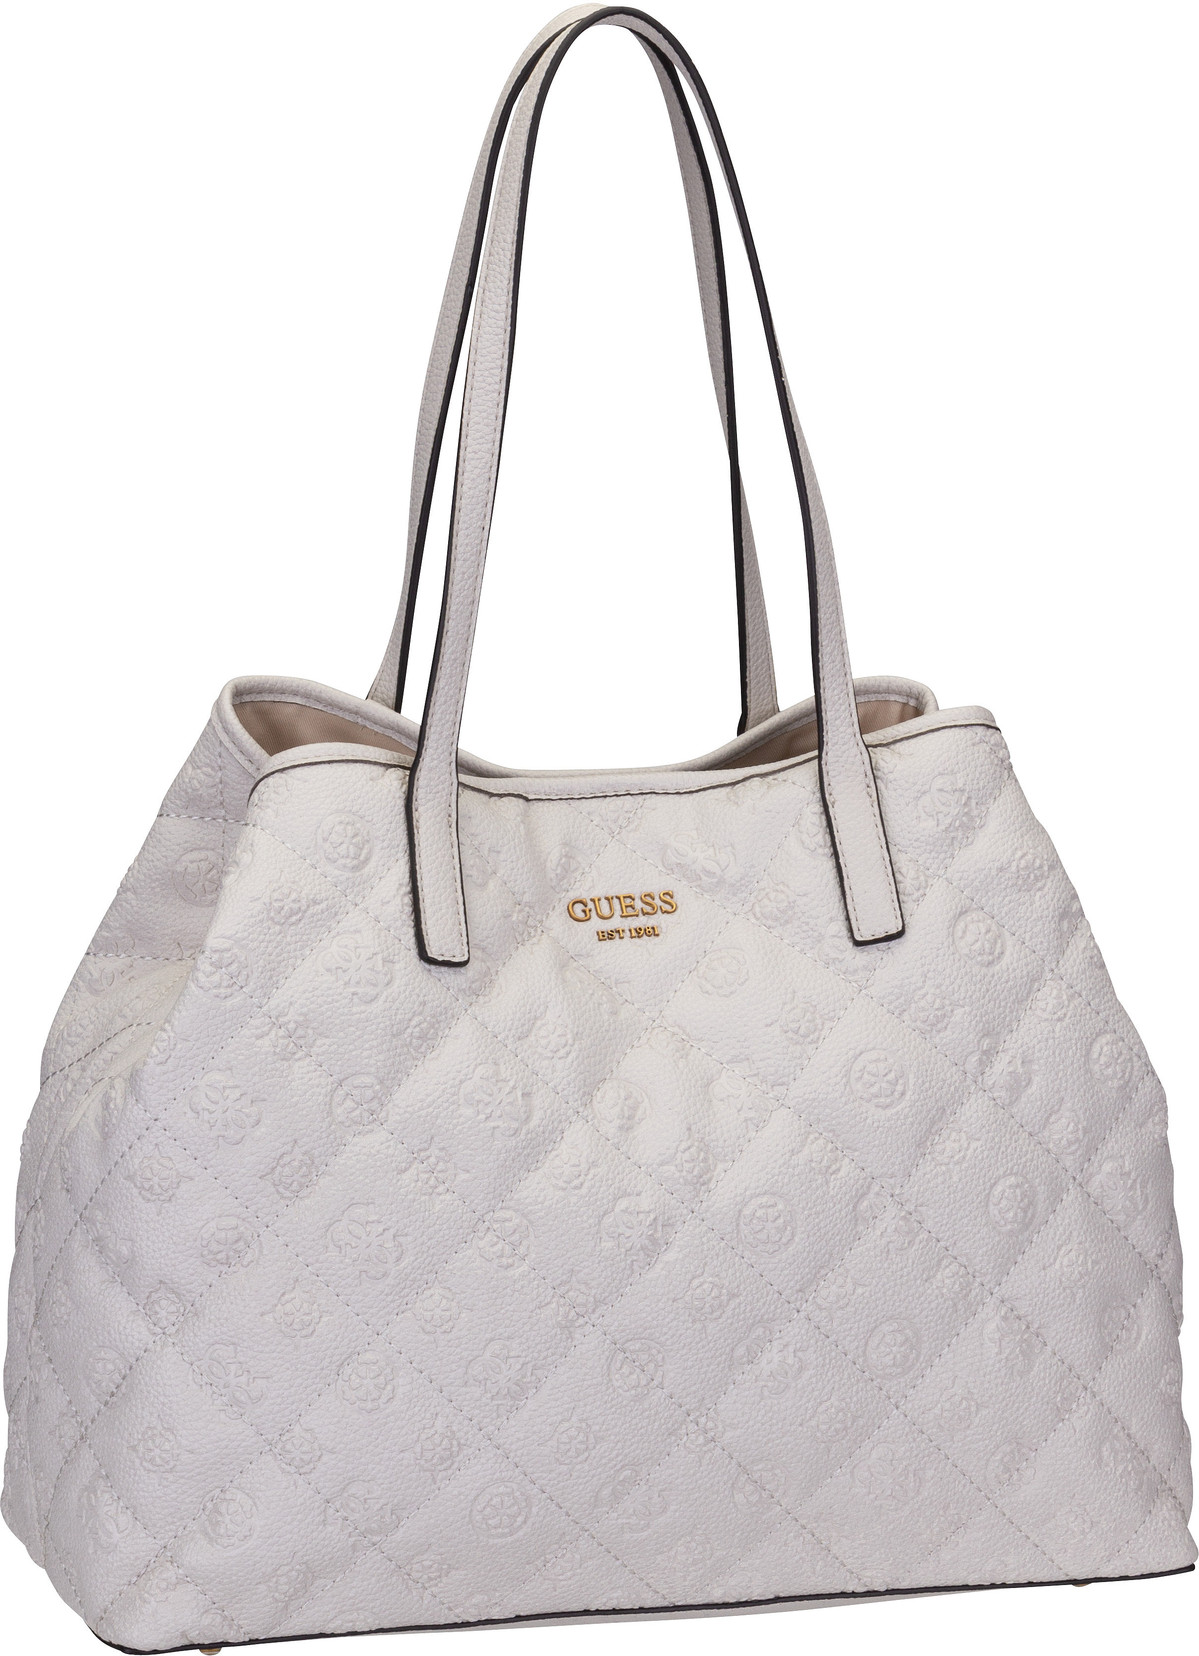 Guess Vikky Large Tote Quilted  in Stone (22.1 Liter), Shopper